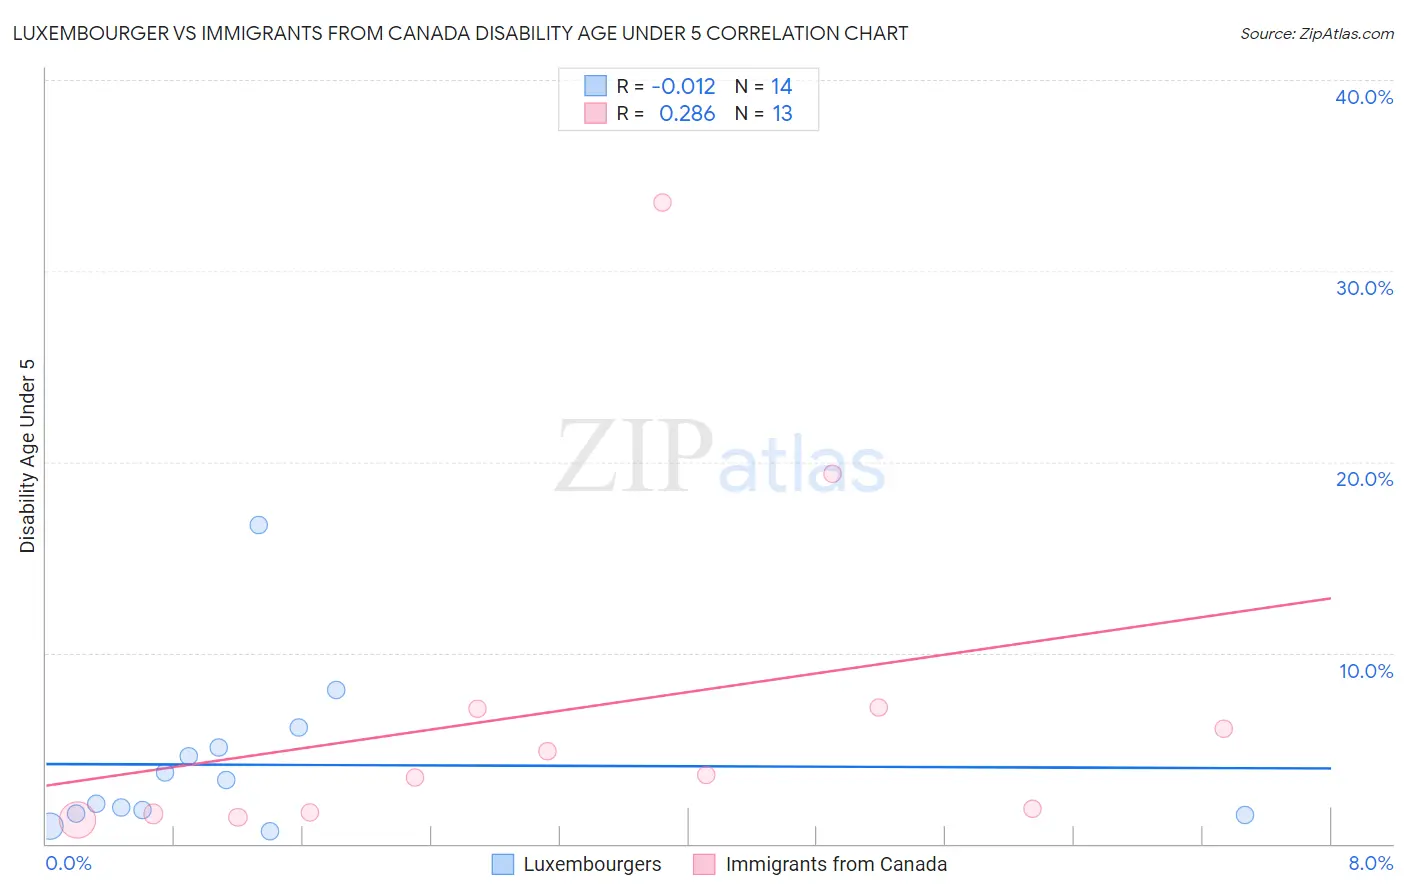 Luxembourger vs Immigrants from Canada Disability Age Under 5